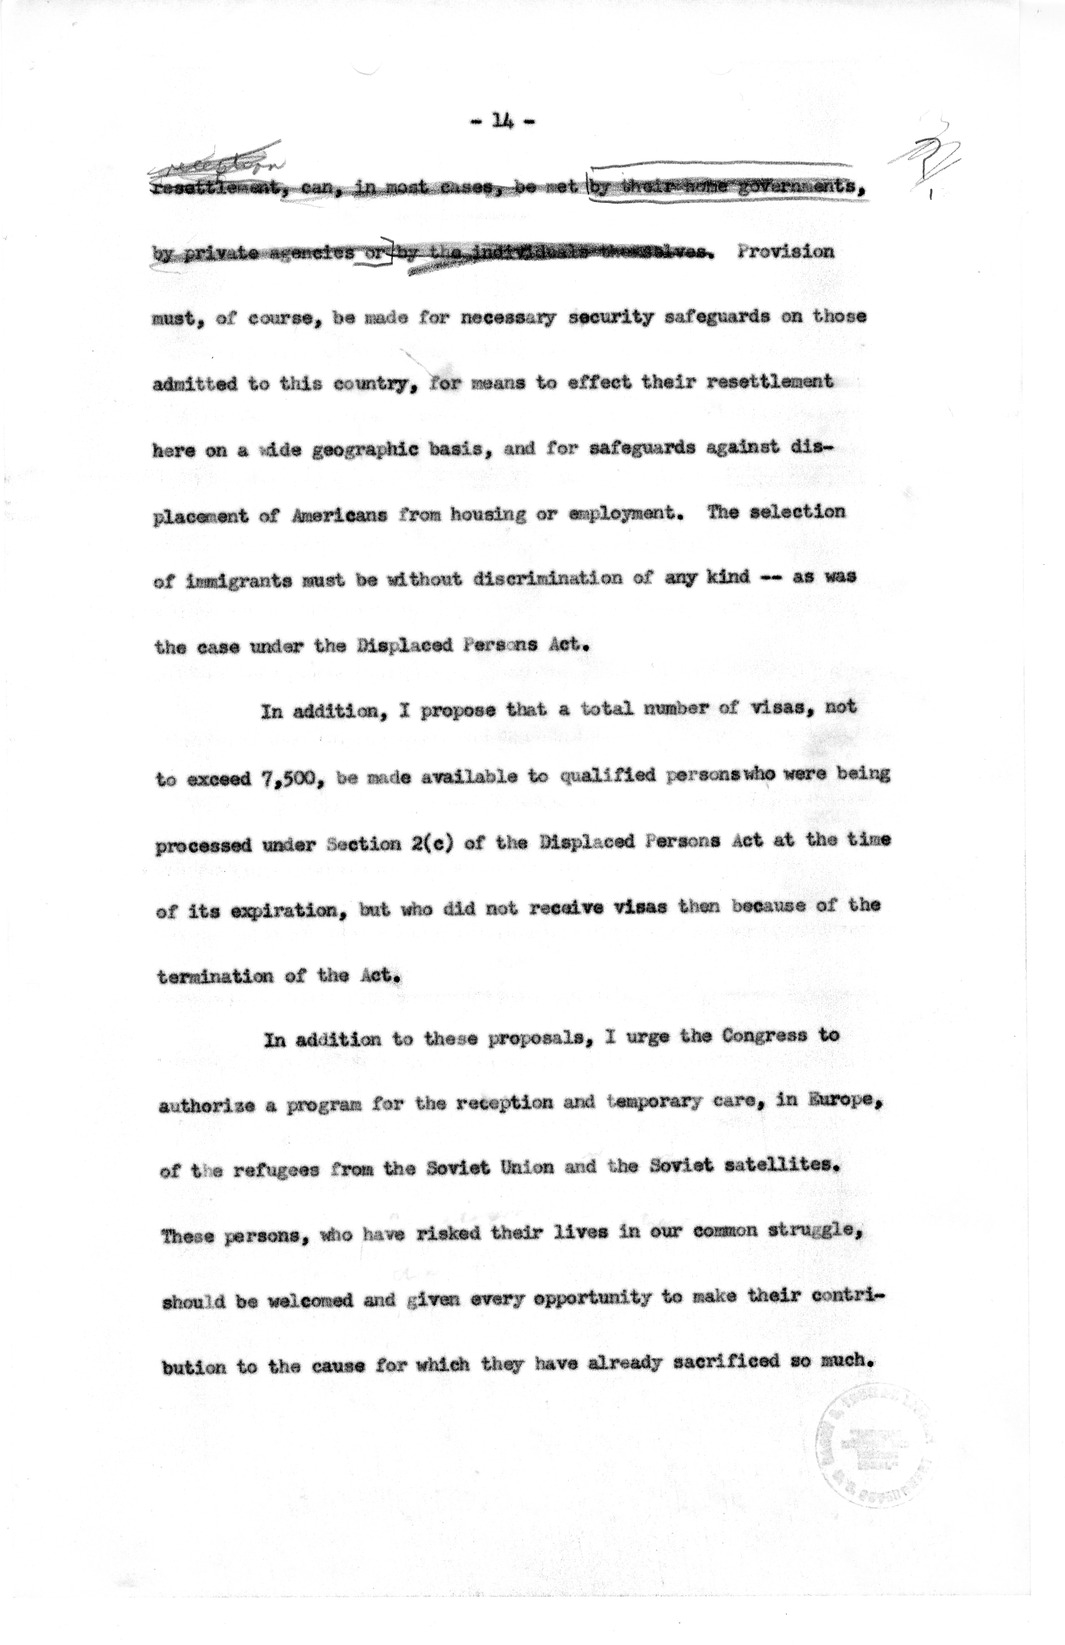 Memorandum from James McTigue to David Lloyd, with Attachments